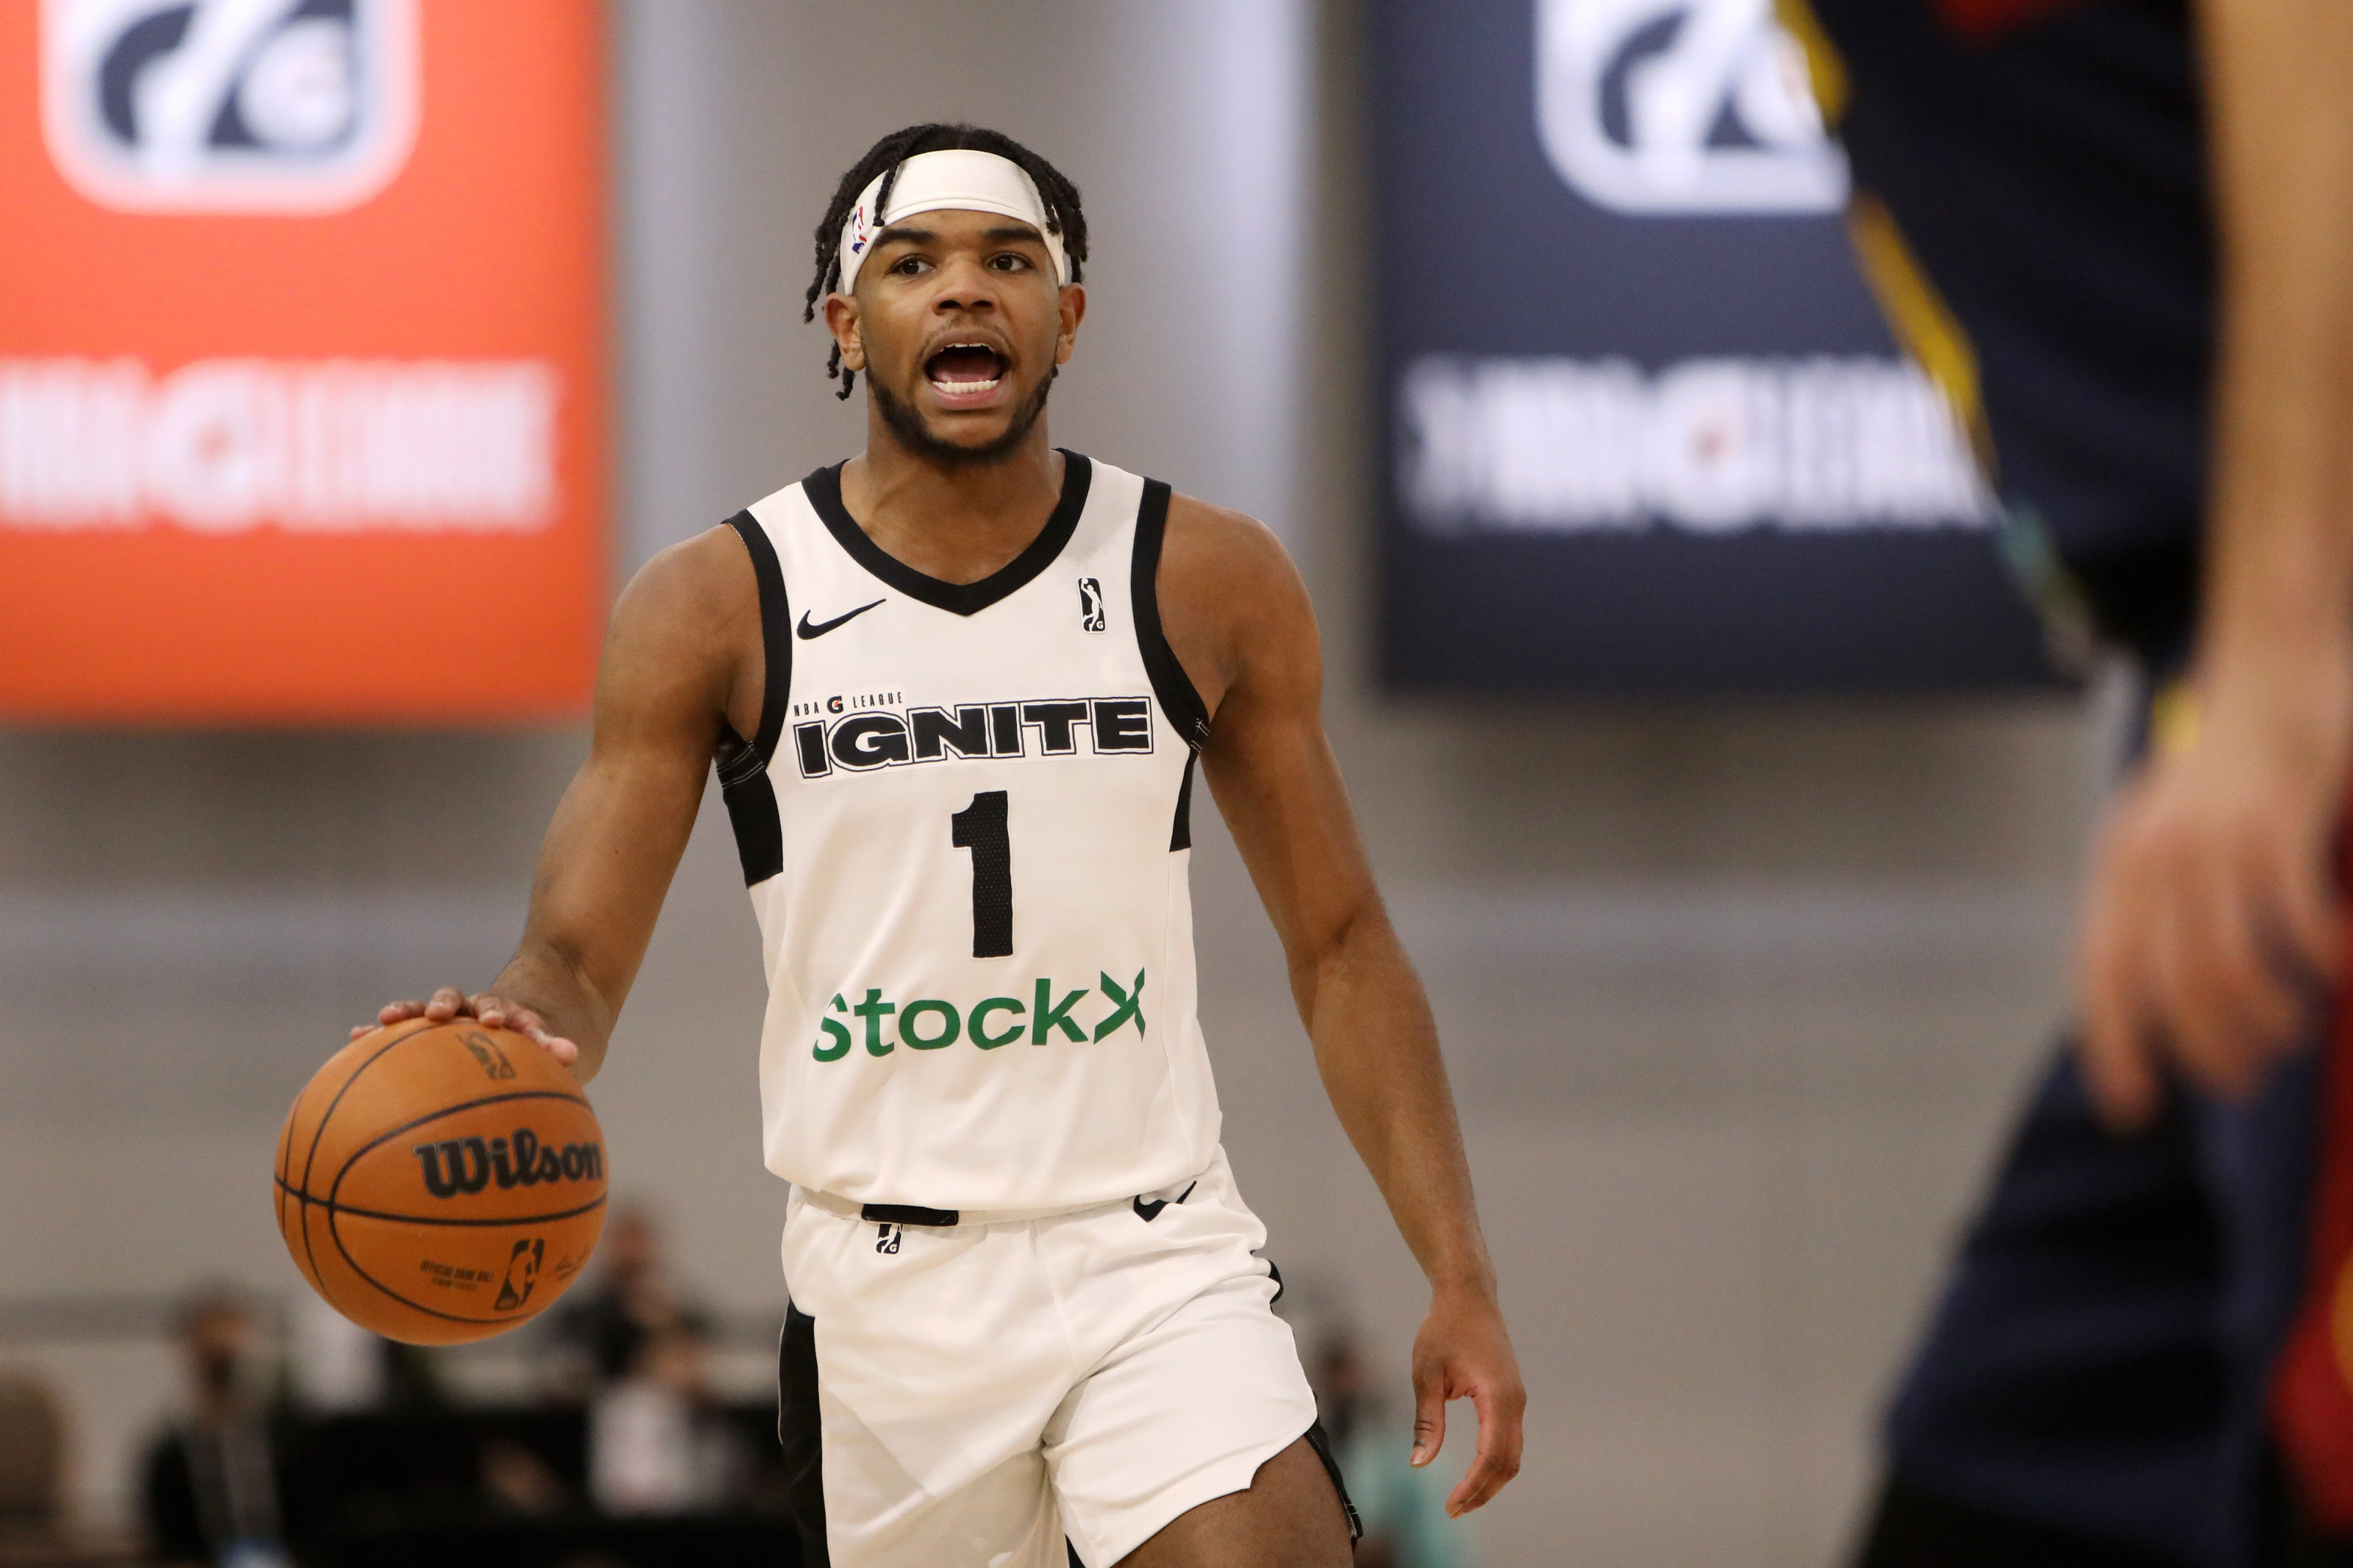 Panini America Signs G League Star Jaden Hardy to Exclusive Deal – Trace 'n  Chase